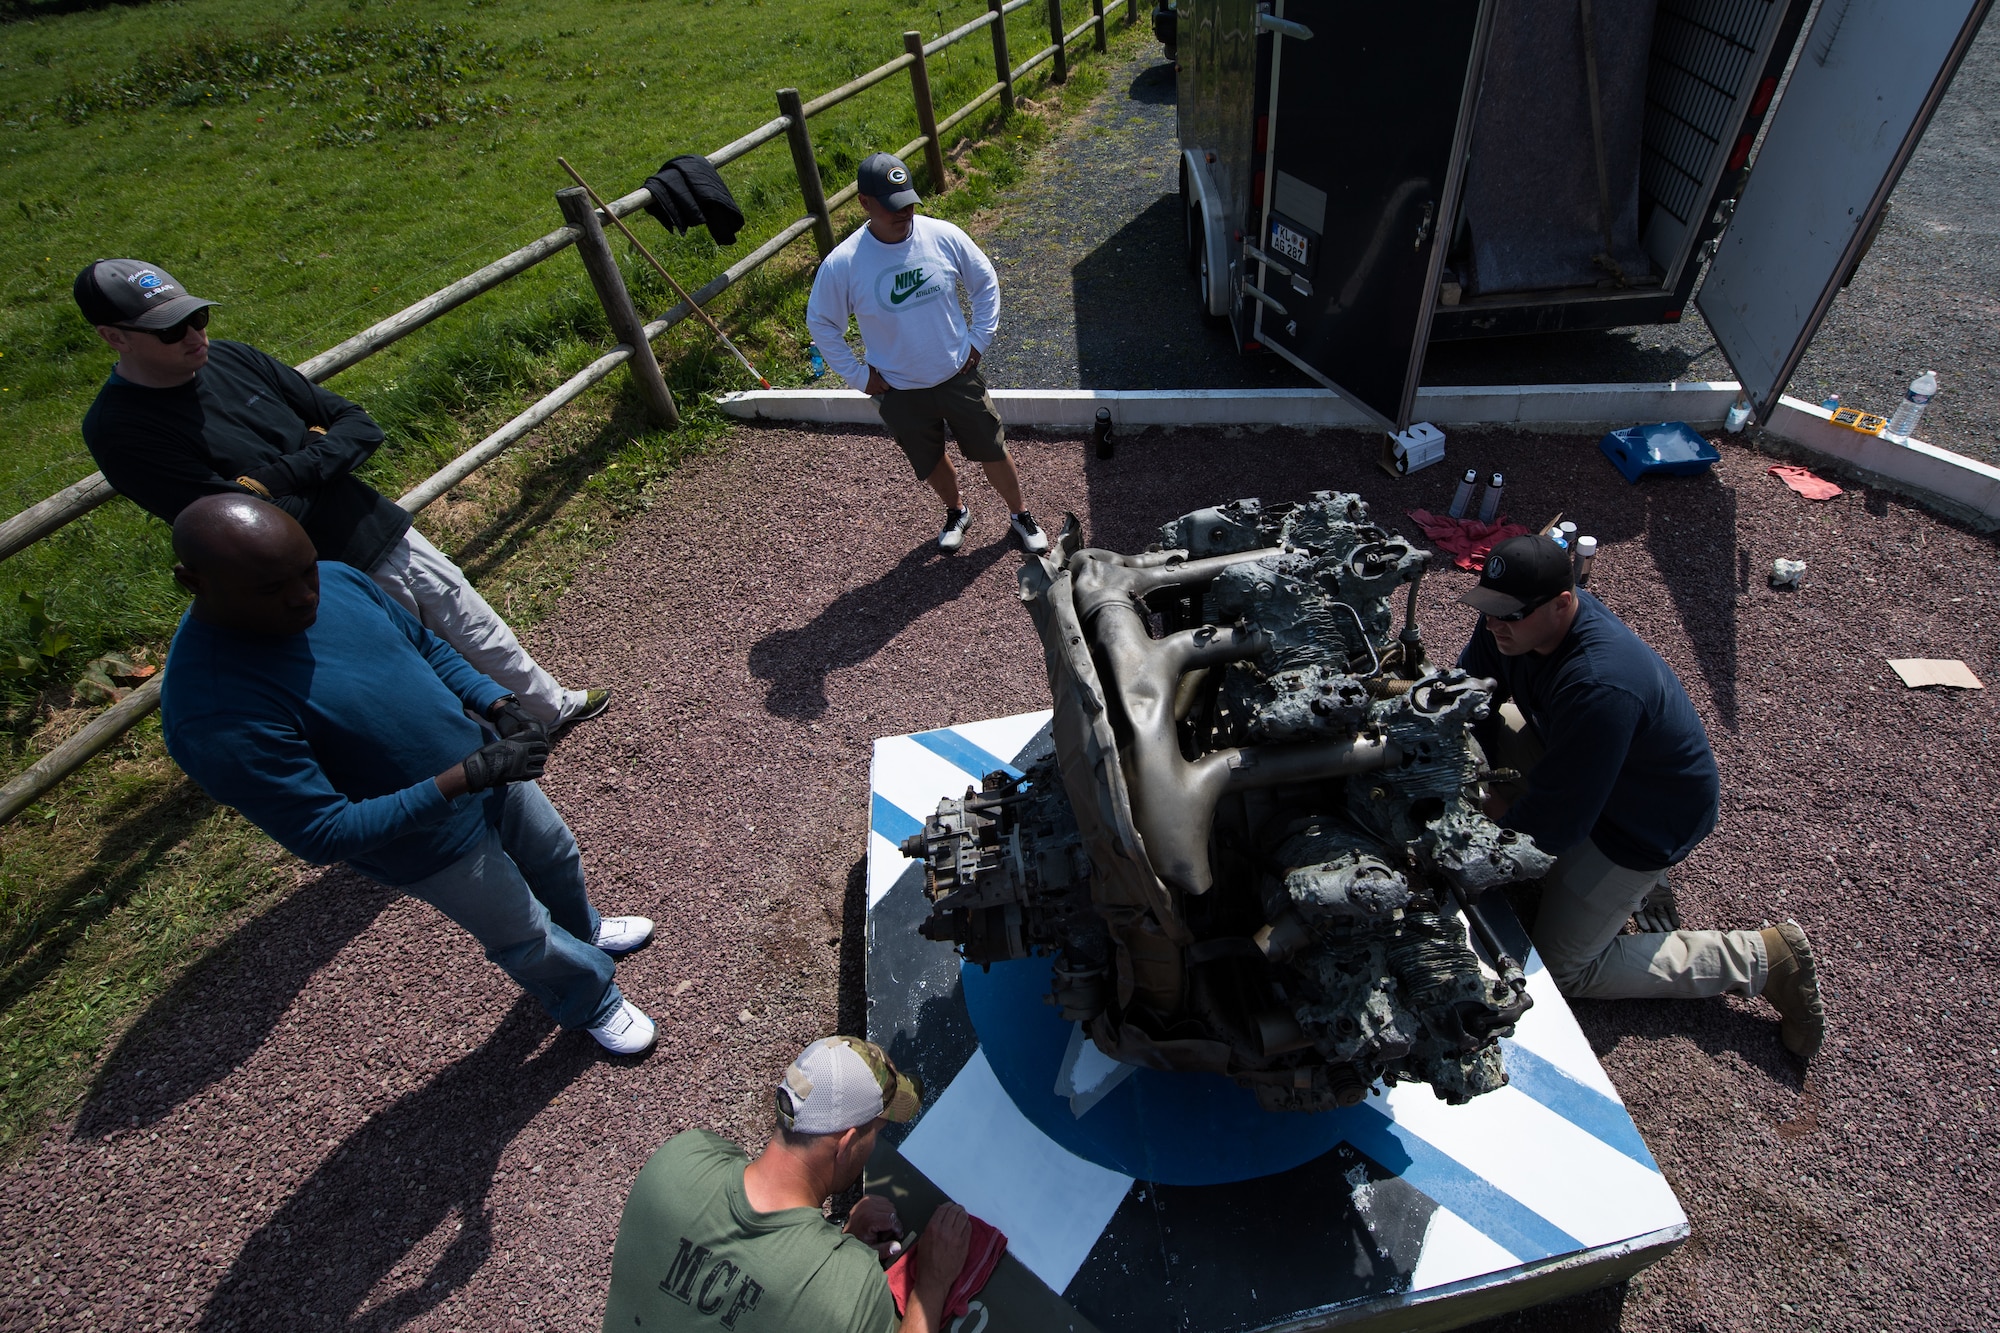 U.S. Air Force Airmen assigned to the 435th Construction Training Squadron refurbish a WWII aircraft engine display at a memorial in Picauville, France, April 30, 2019. Years of weathering rendered the display unpresentable. The 435th CTS team replaced the translucent case around the display with a new one, allowing people to see the aircraft engine inside. (U.S. Air Force photo by Staff Sgt. Devin Boyer)